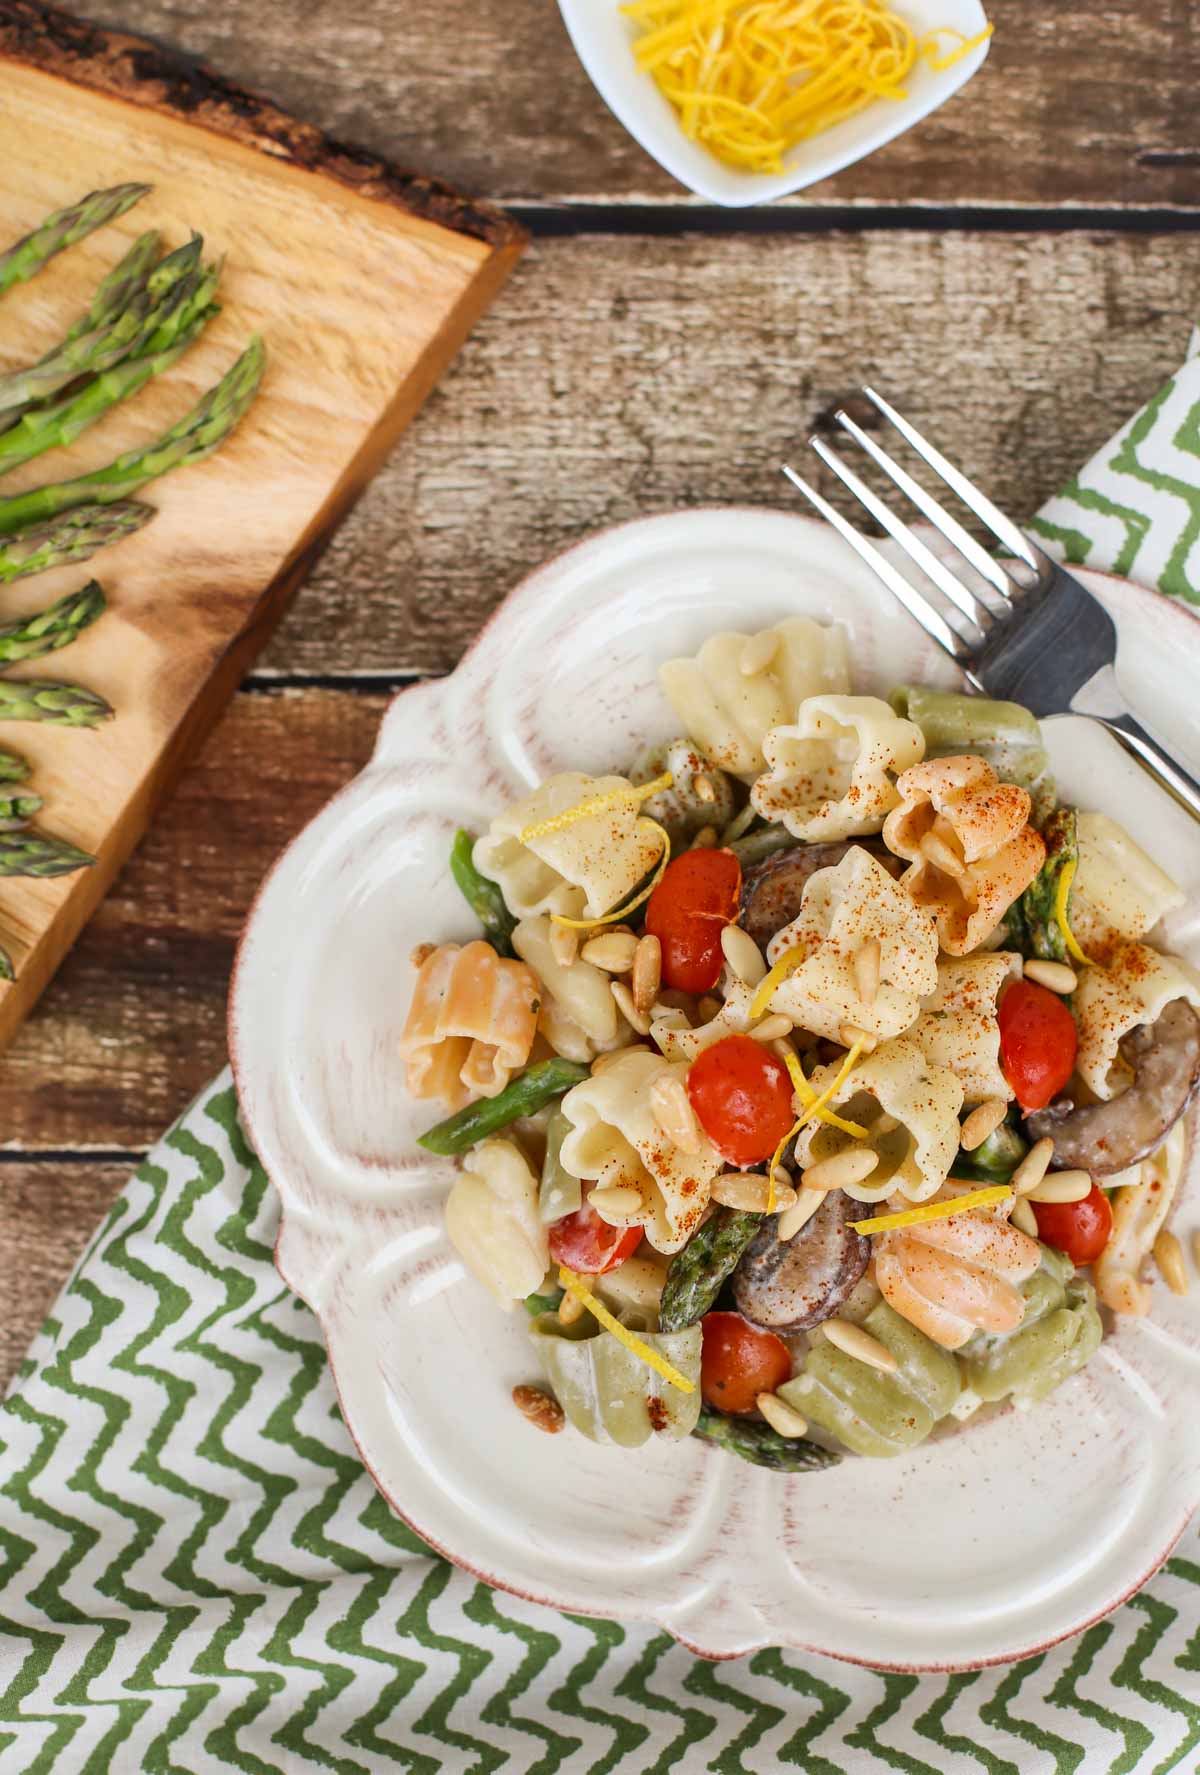 Boursin® Pasta with Oven Roasted Veggies | Simple recipe with sweet roasted veggies and a creamy sauce of Garlic and Herb Boursin Cheese...will become a favorite! Delicious side with grilled meats! | WorldofPastabilities.com